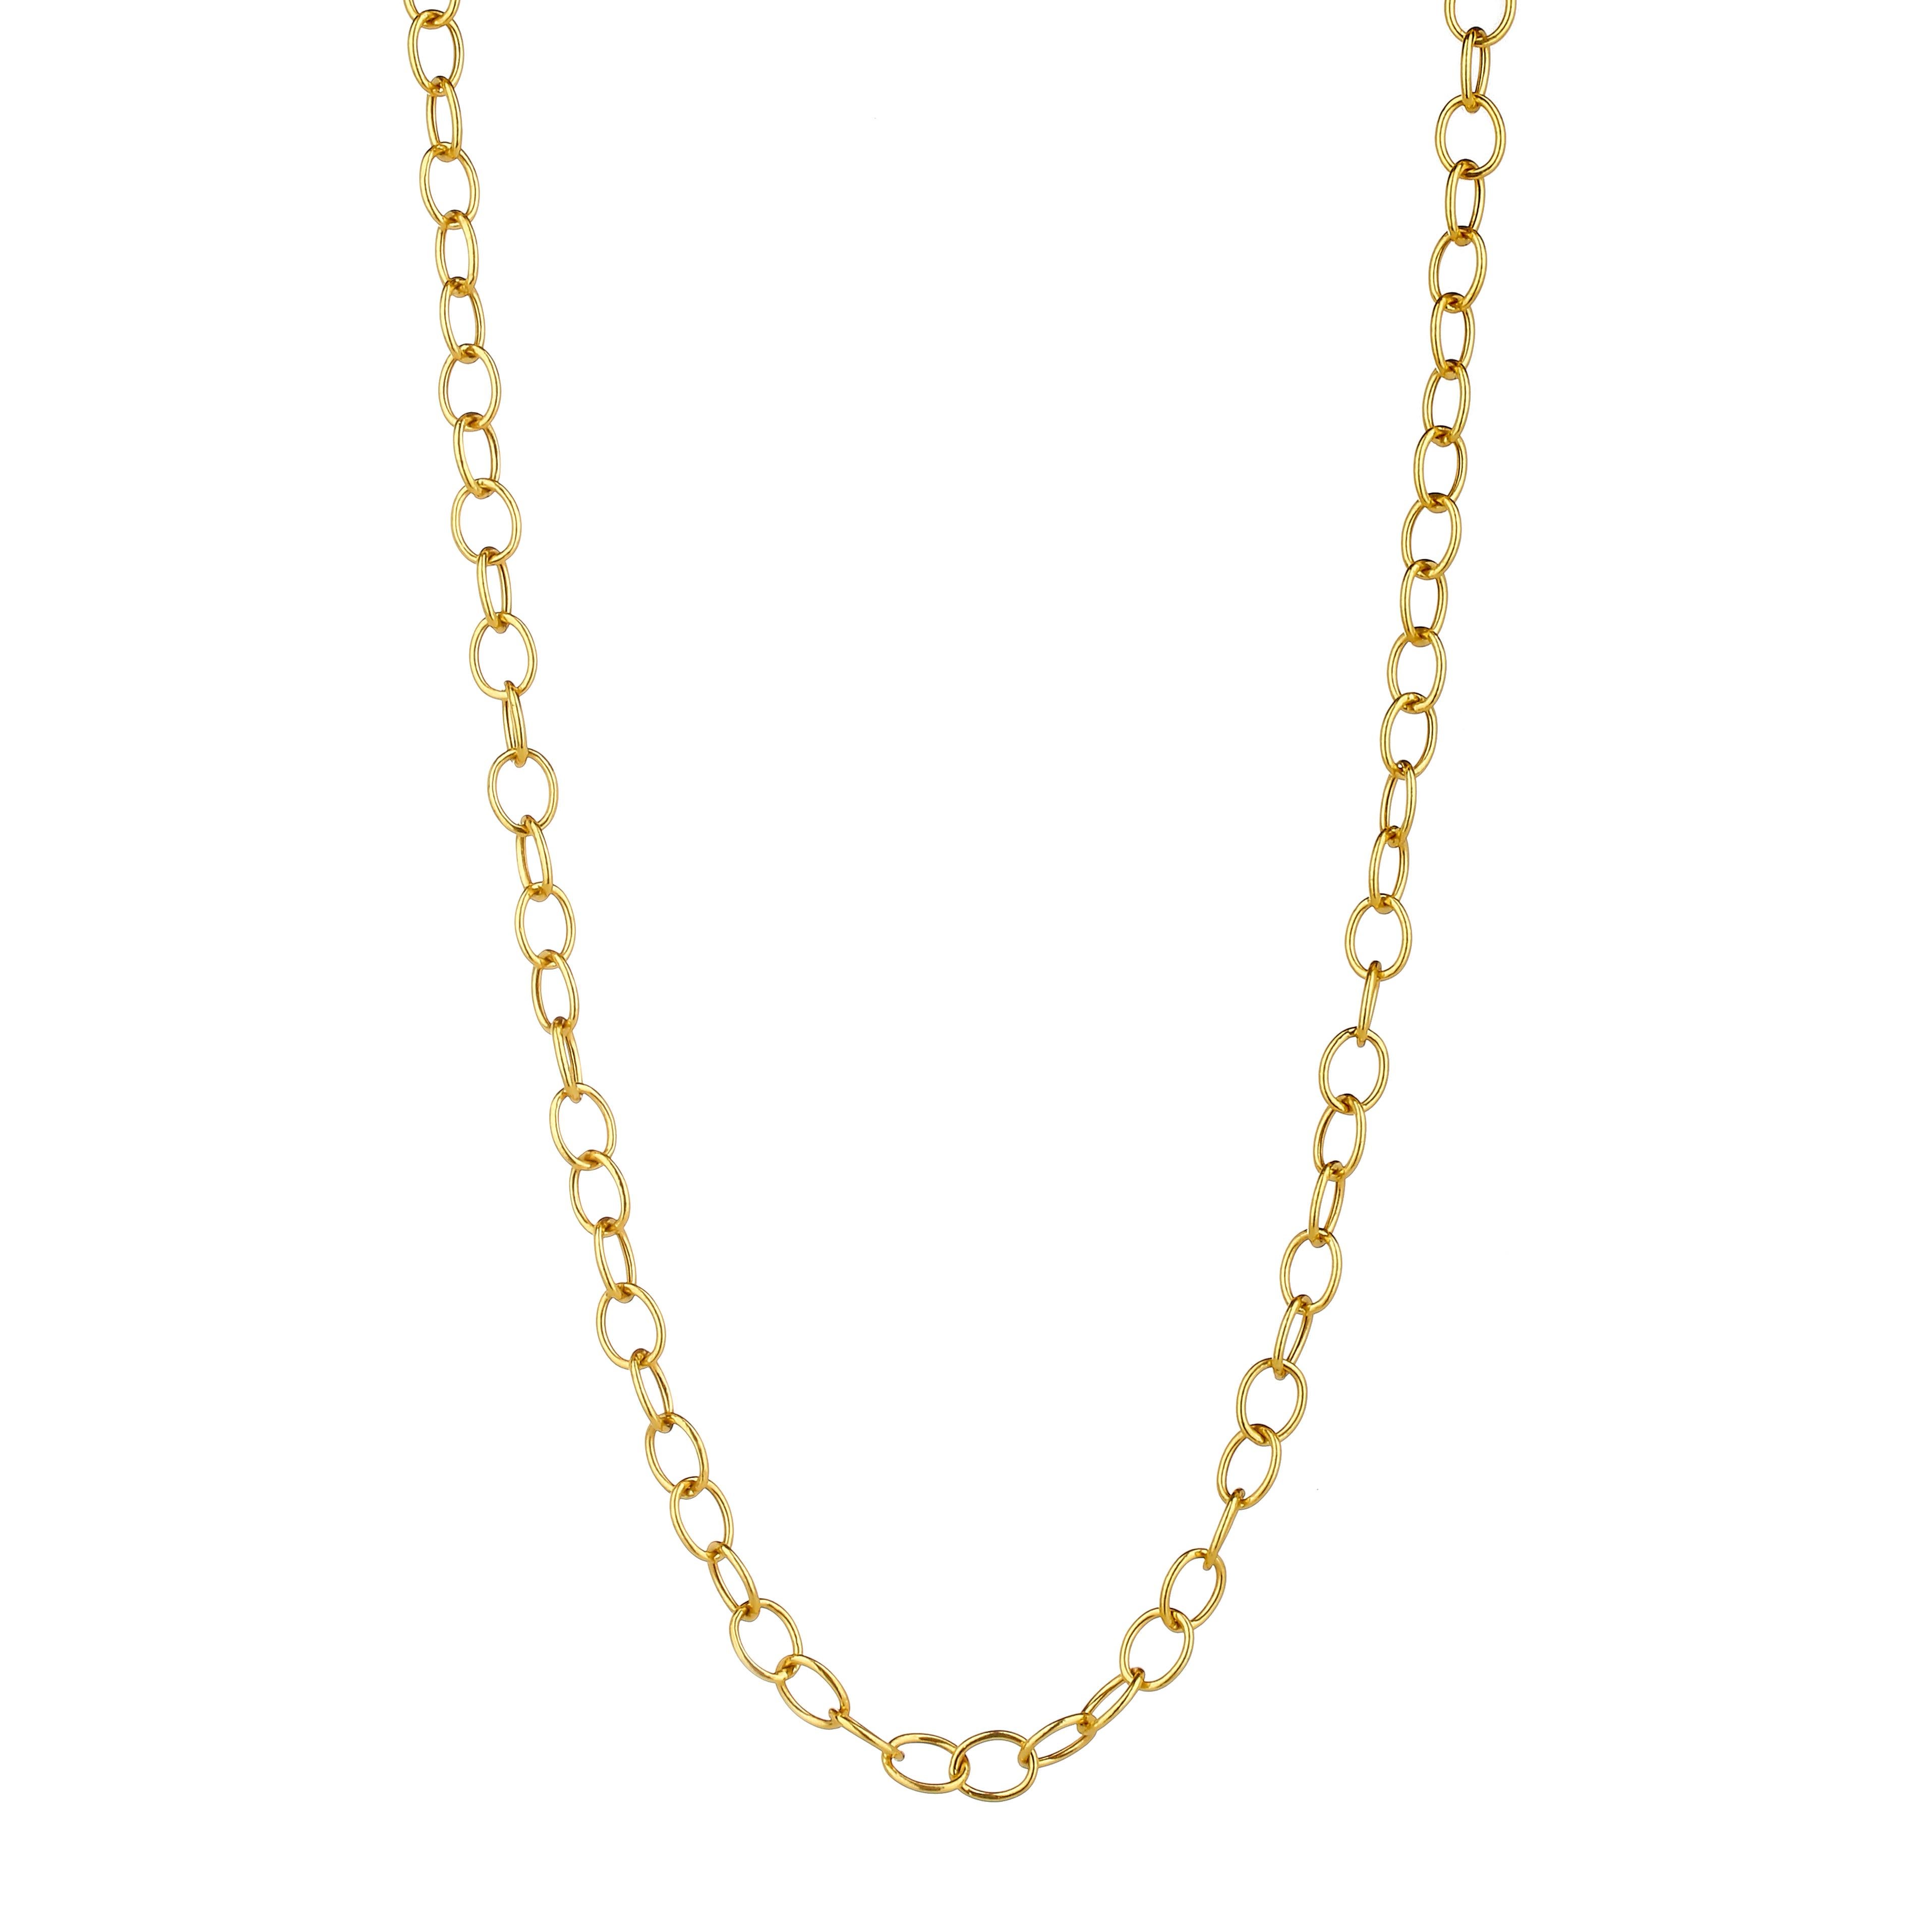 Created in 18 karat yellow gold
30 inch length
Weight 12 grams approx.
18 karat yellow gold lobster clasp
Chain can be clasped at any length

Expertly crafted 18 karat yellow gold, the 30 inch length and 12 gram weight make this chain an ideal